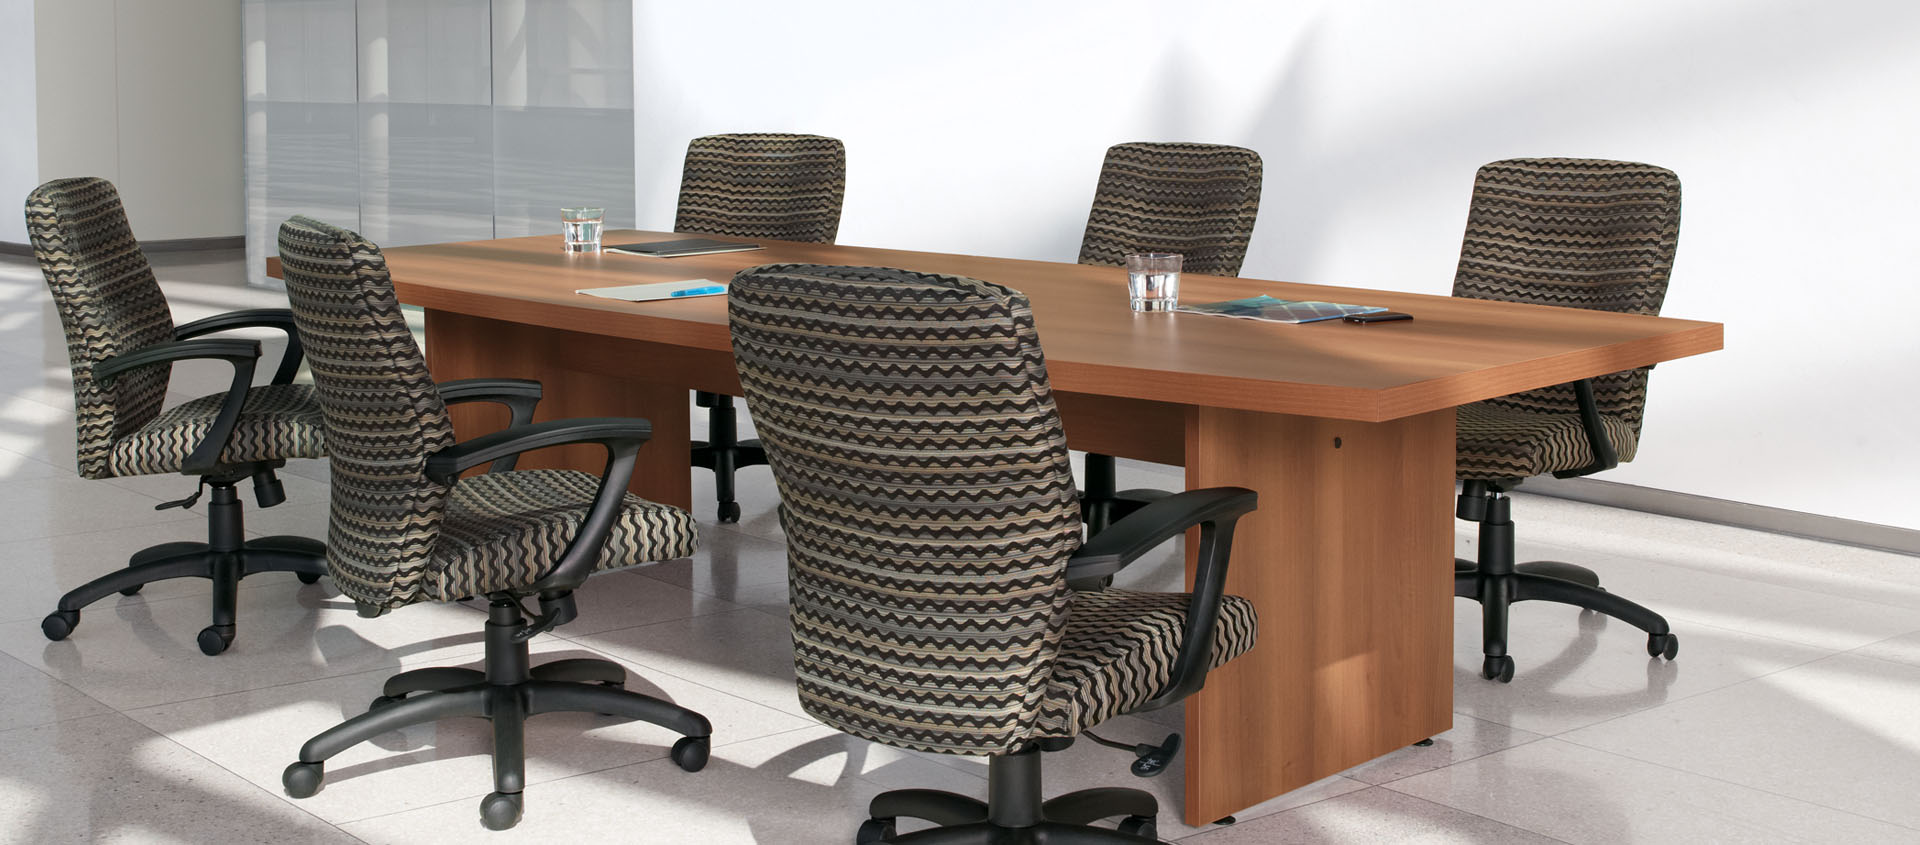 Image of boardroom furniture showing tables and chairs